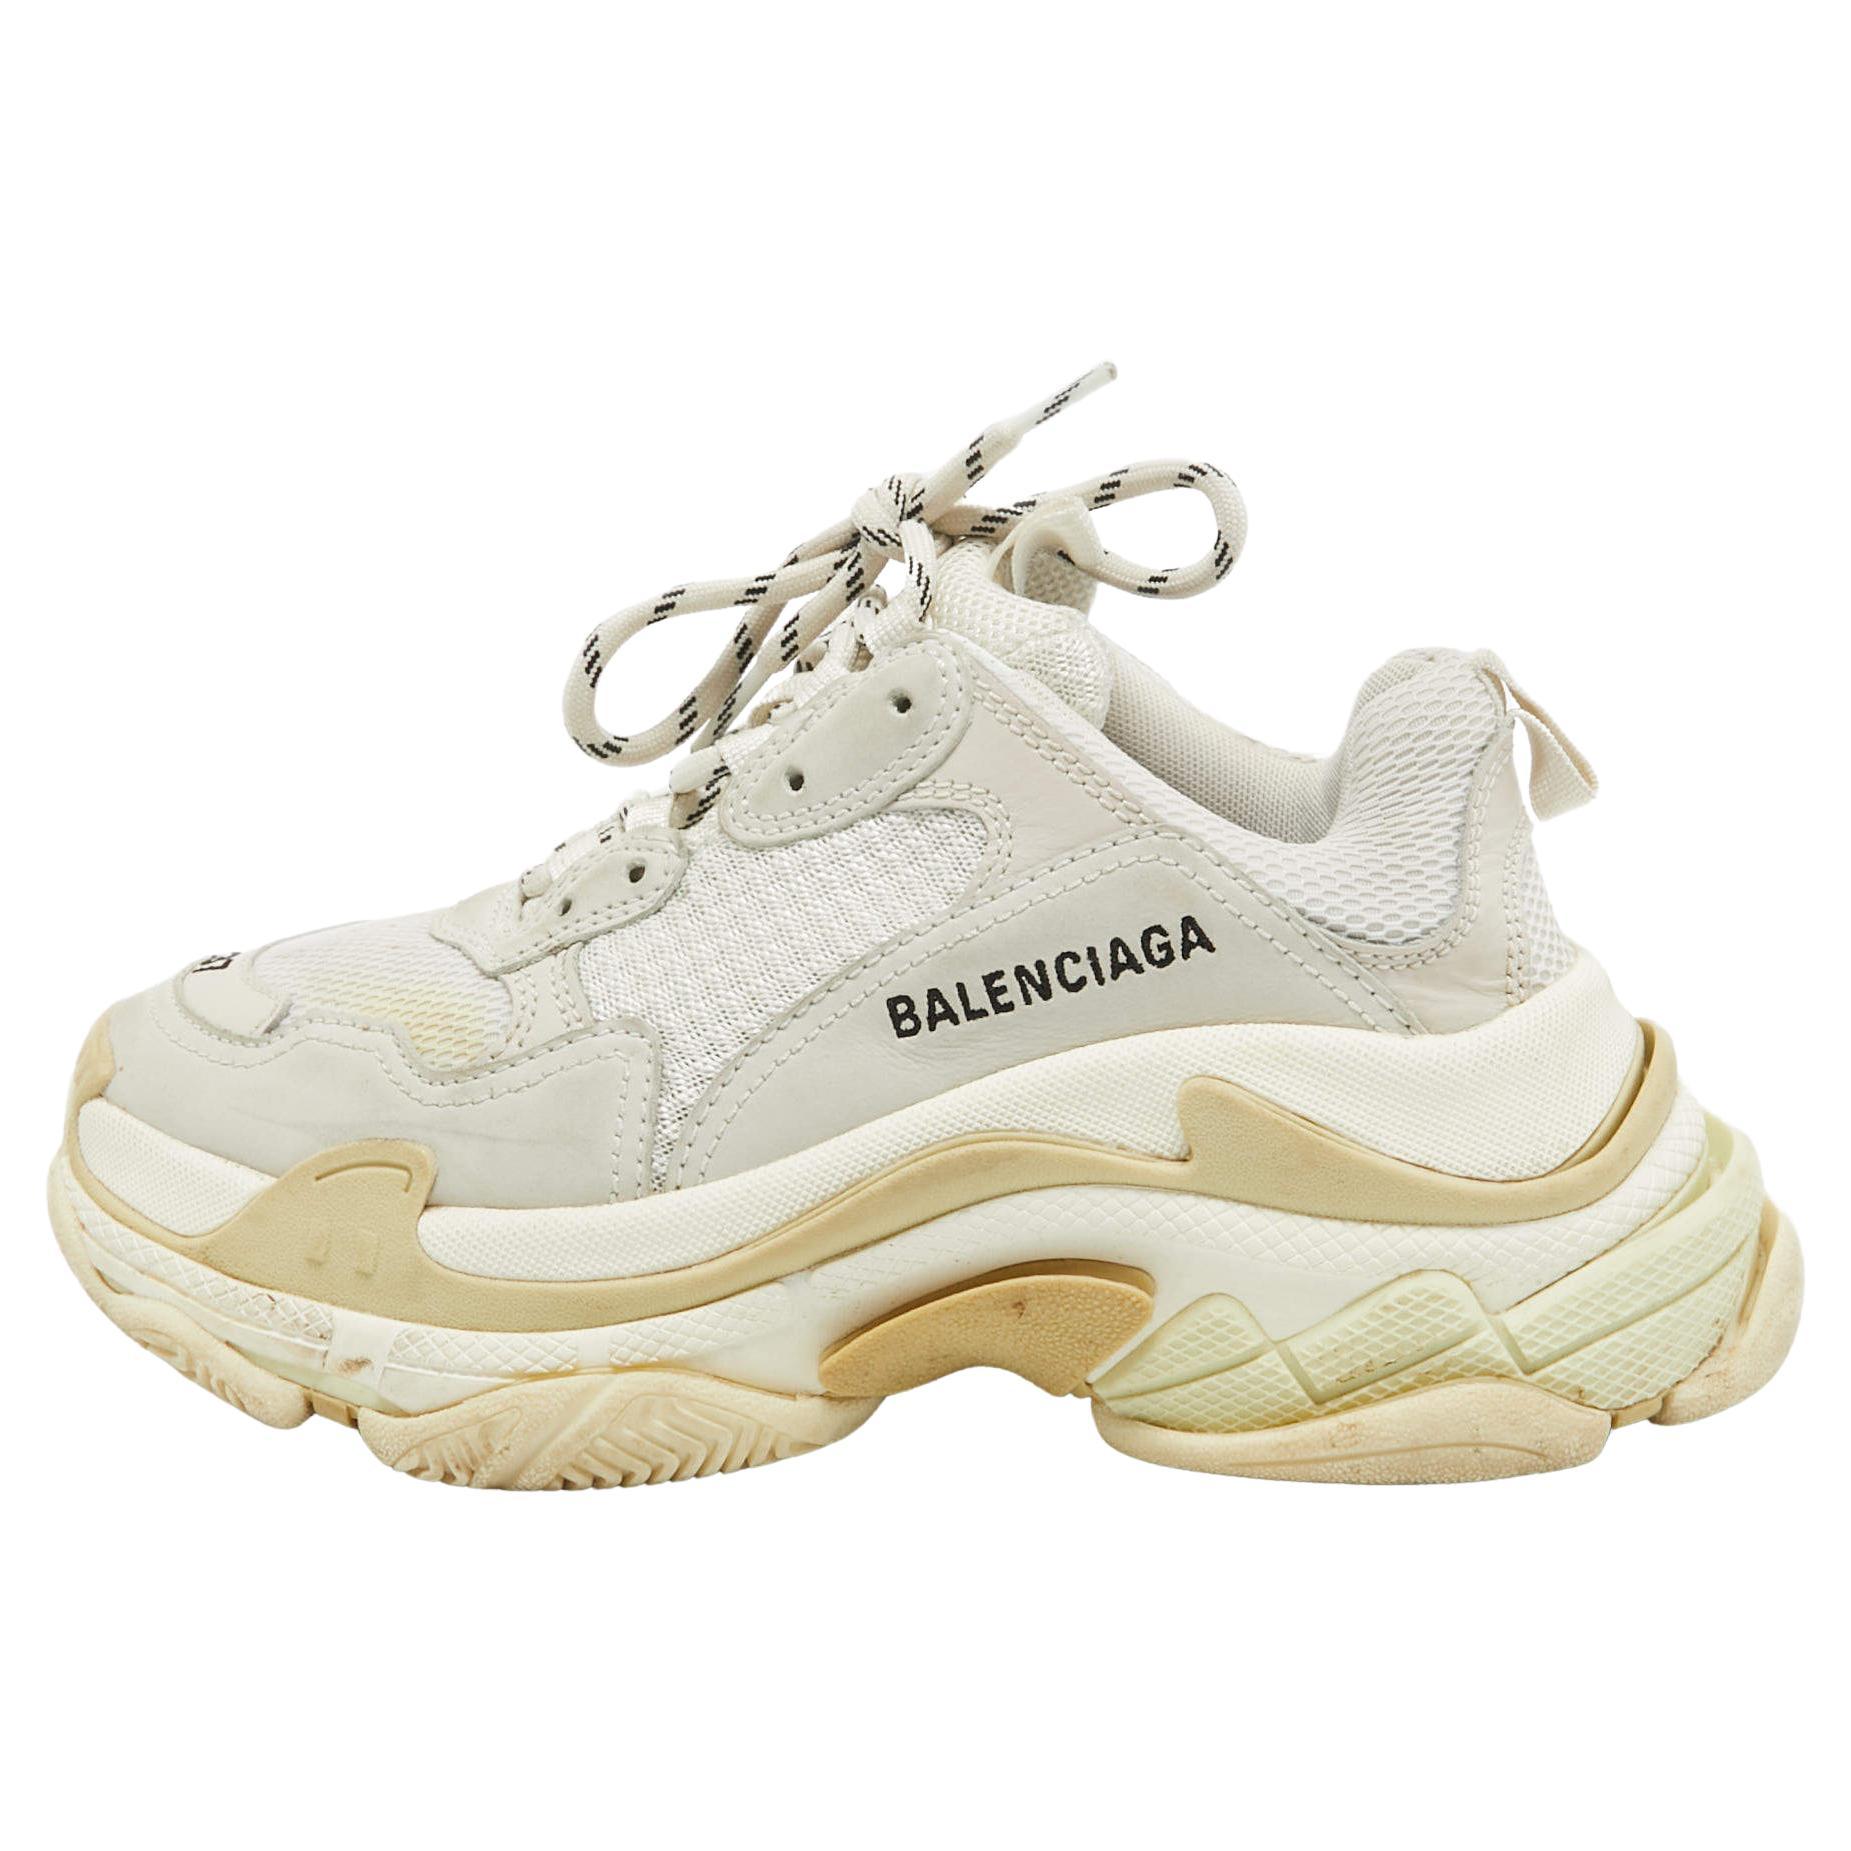 Balenciaga White/Grey Mesh and Leather Triple S Low Top Sneakers Size 37